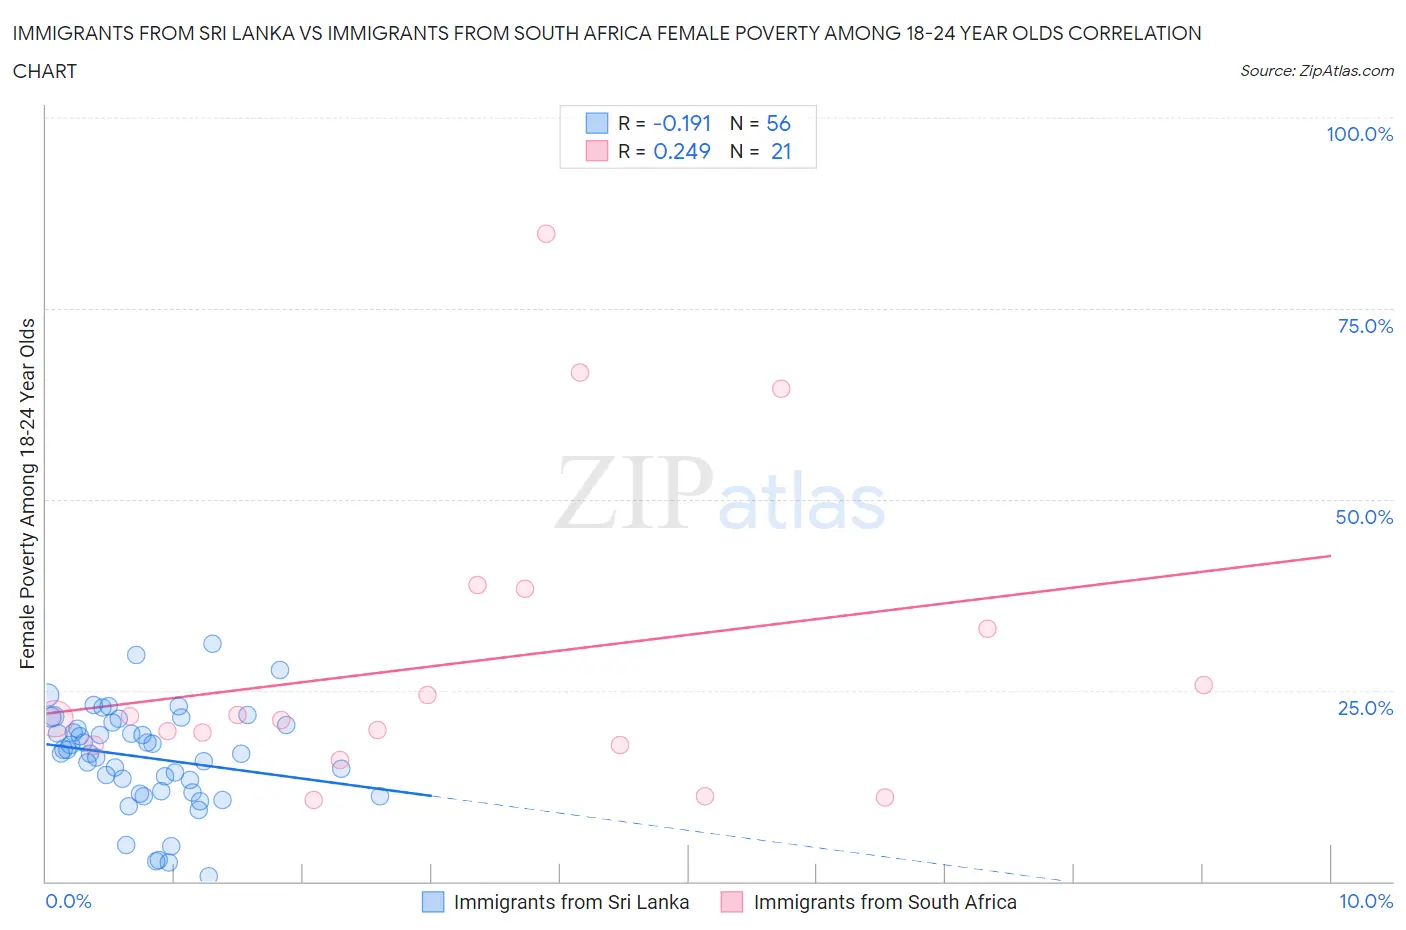 Immigrants from Sri Lanka vs Immigrants from South Africa Female Poverty Among 18-24 Year Olds